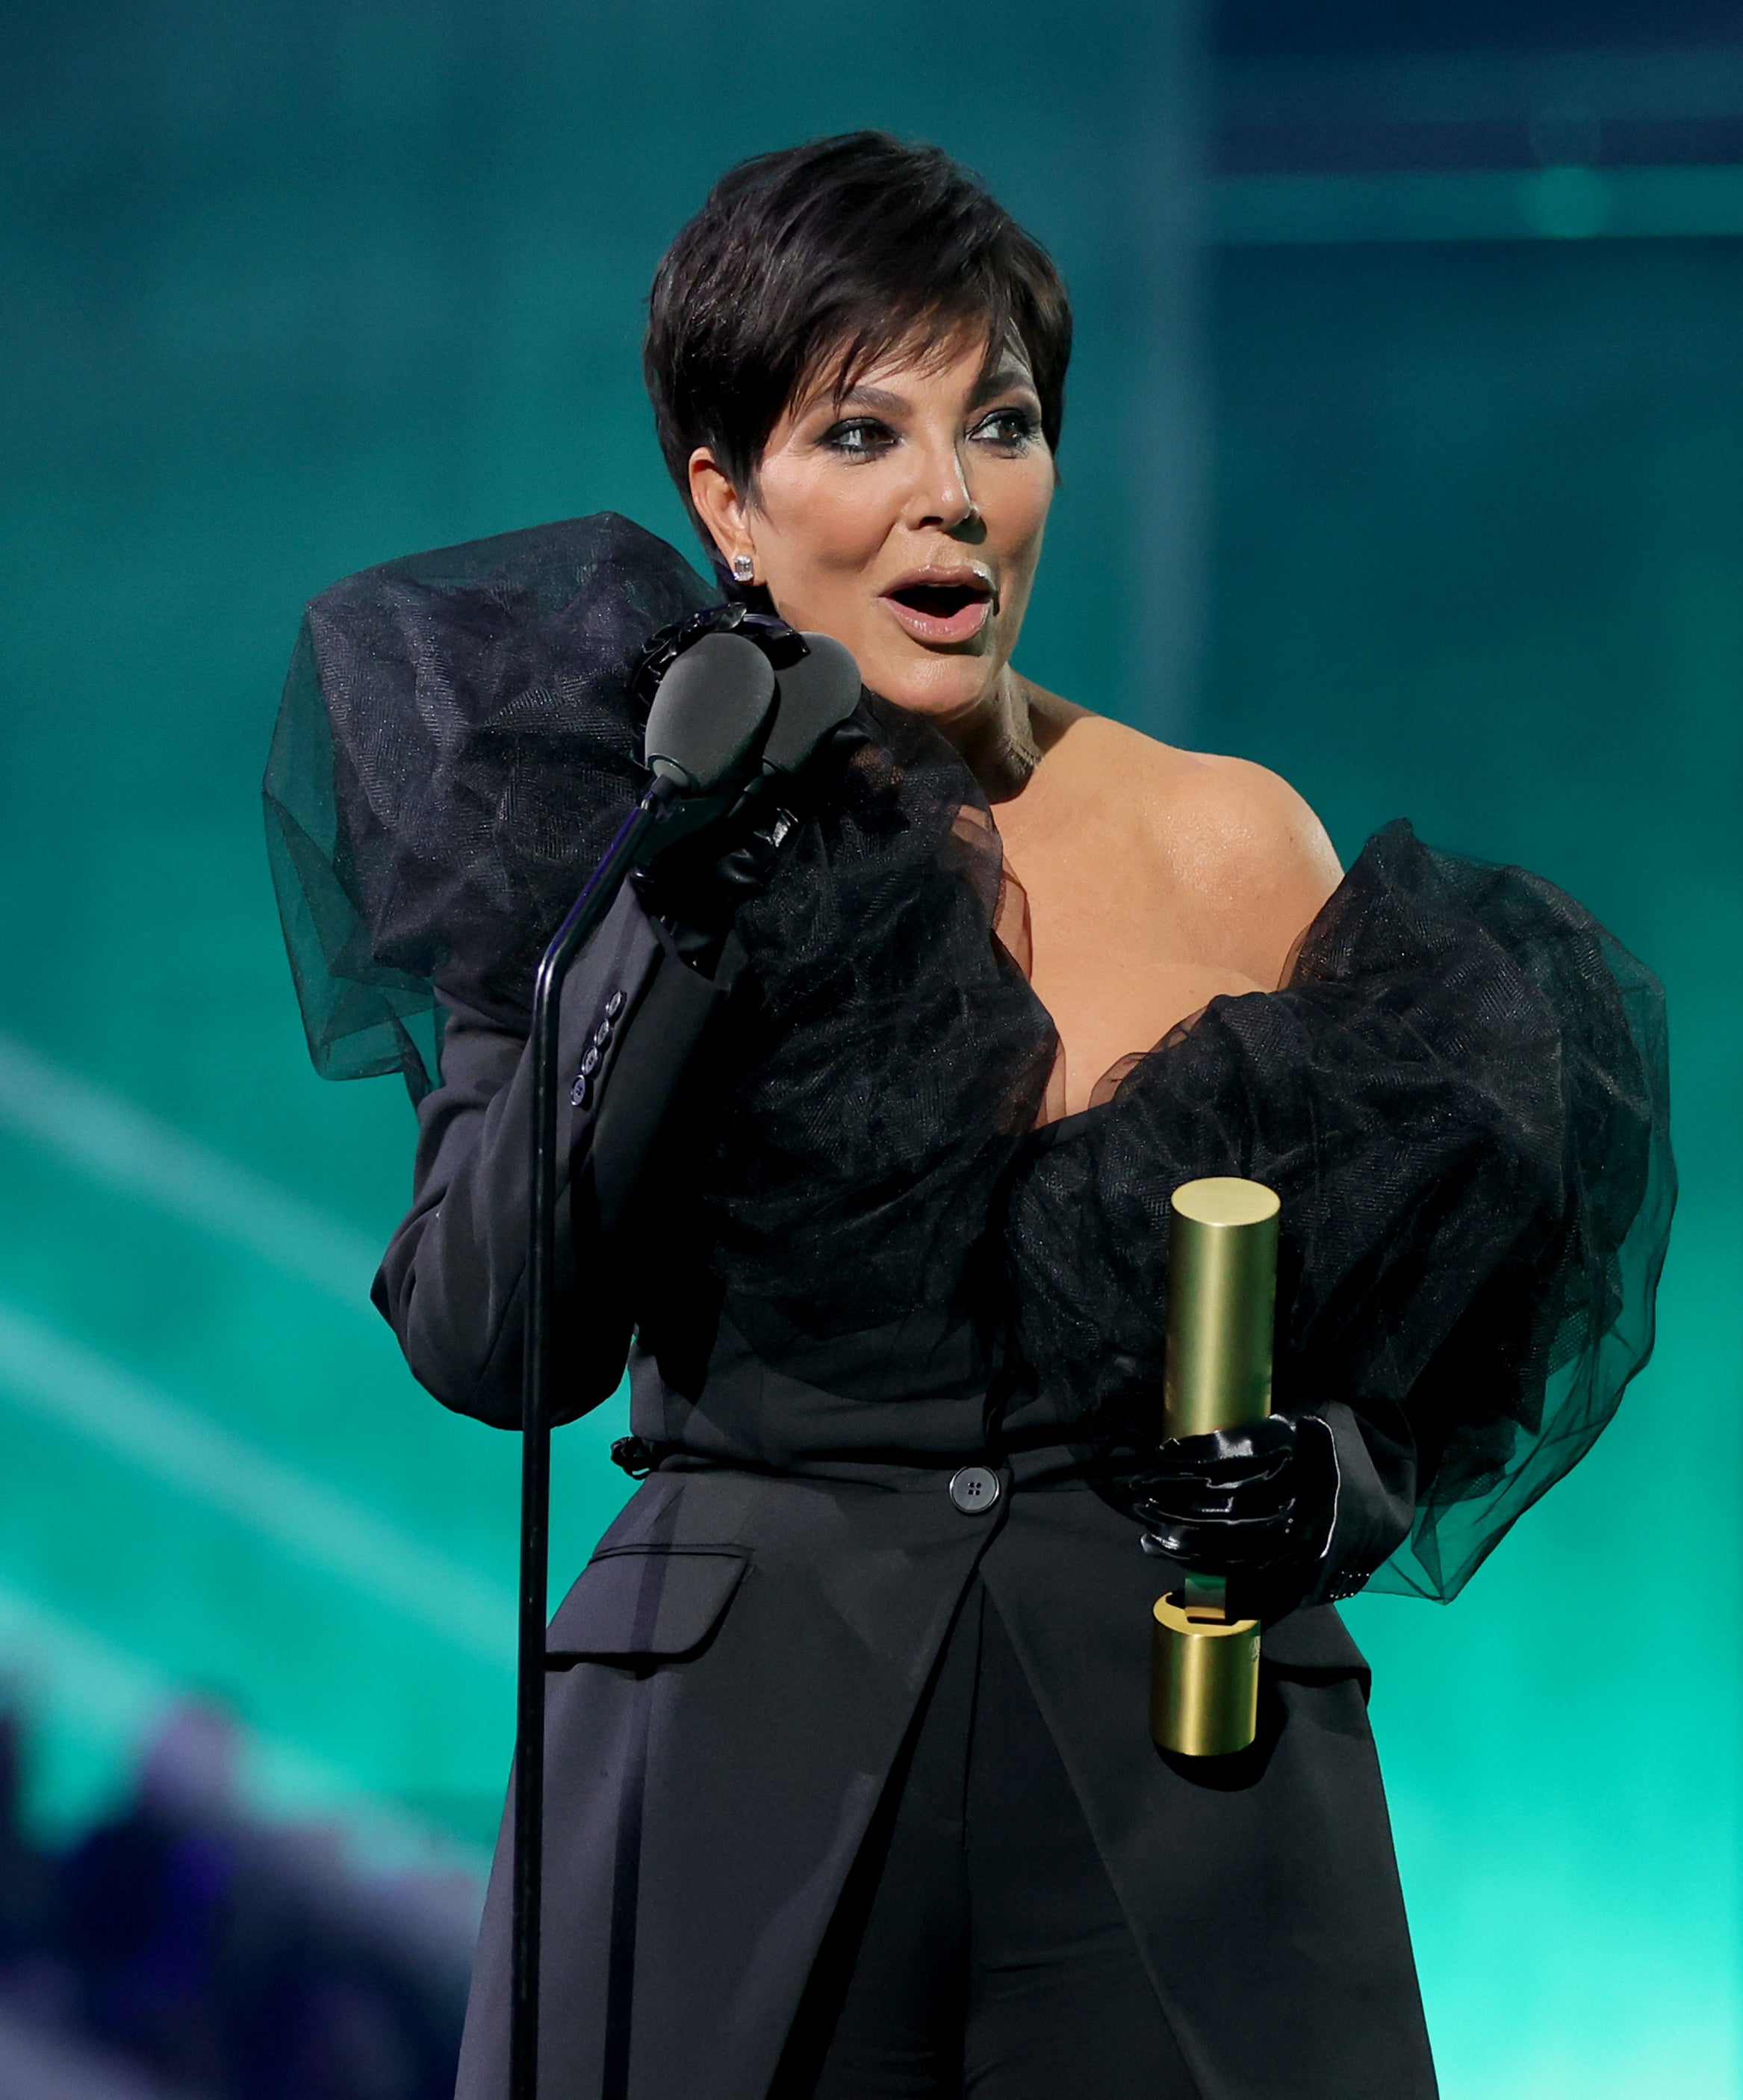 Close-up of Kris onstage holding an award